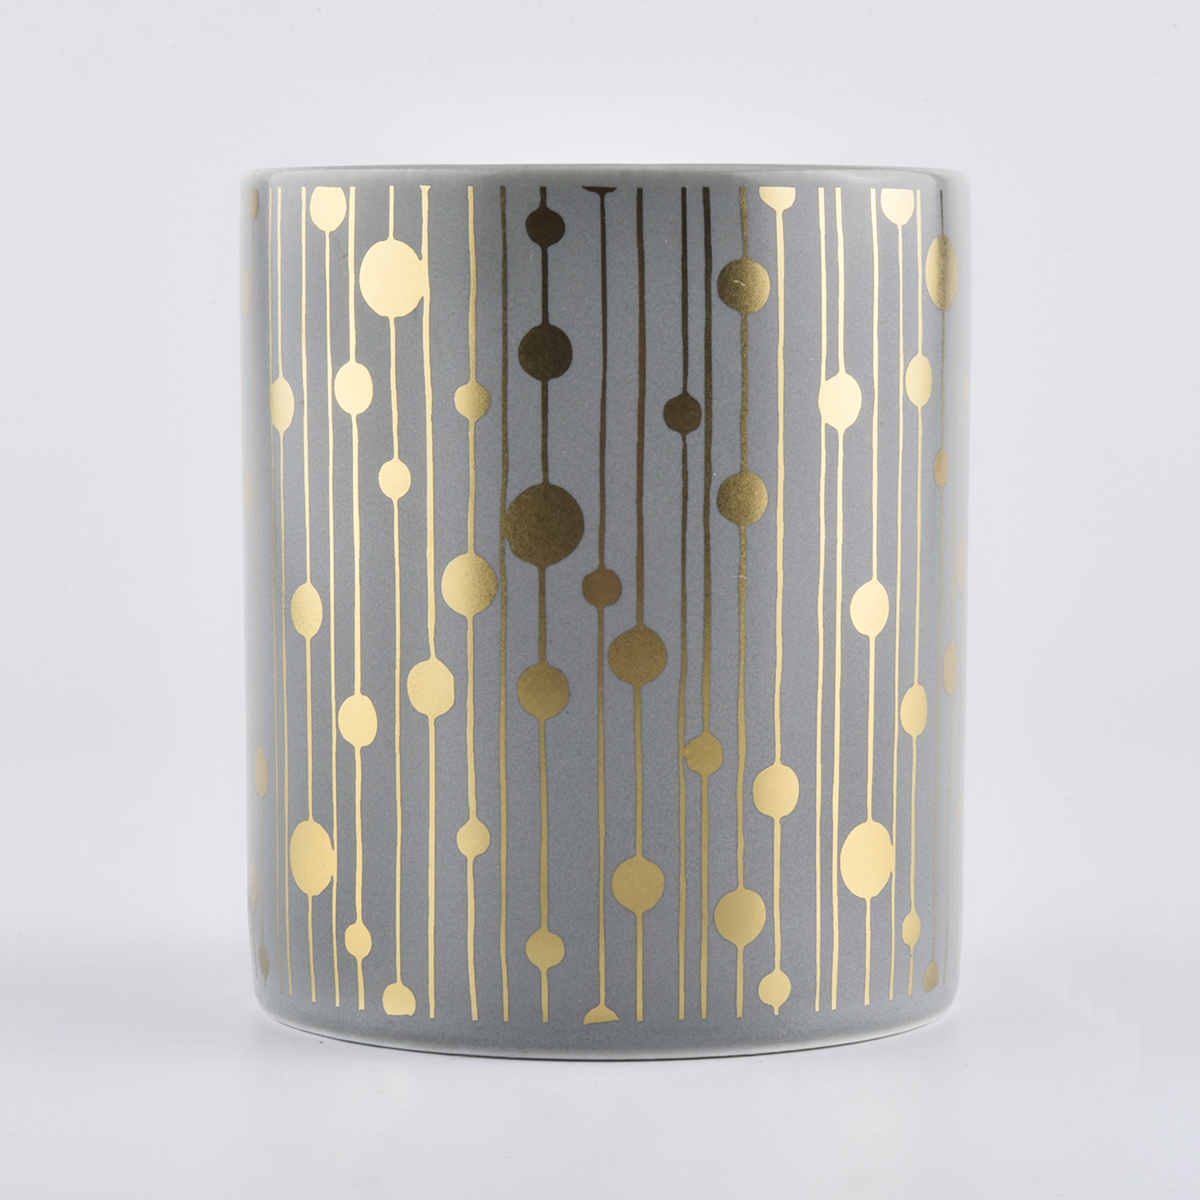 12 oz ceramic candle vessels with gold pattern, unique ceramic candle vessel for candle making